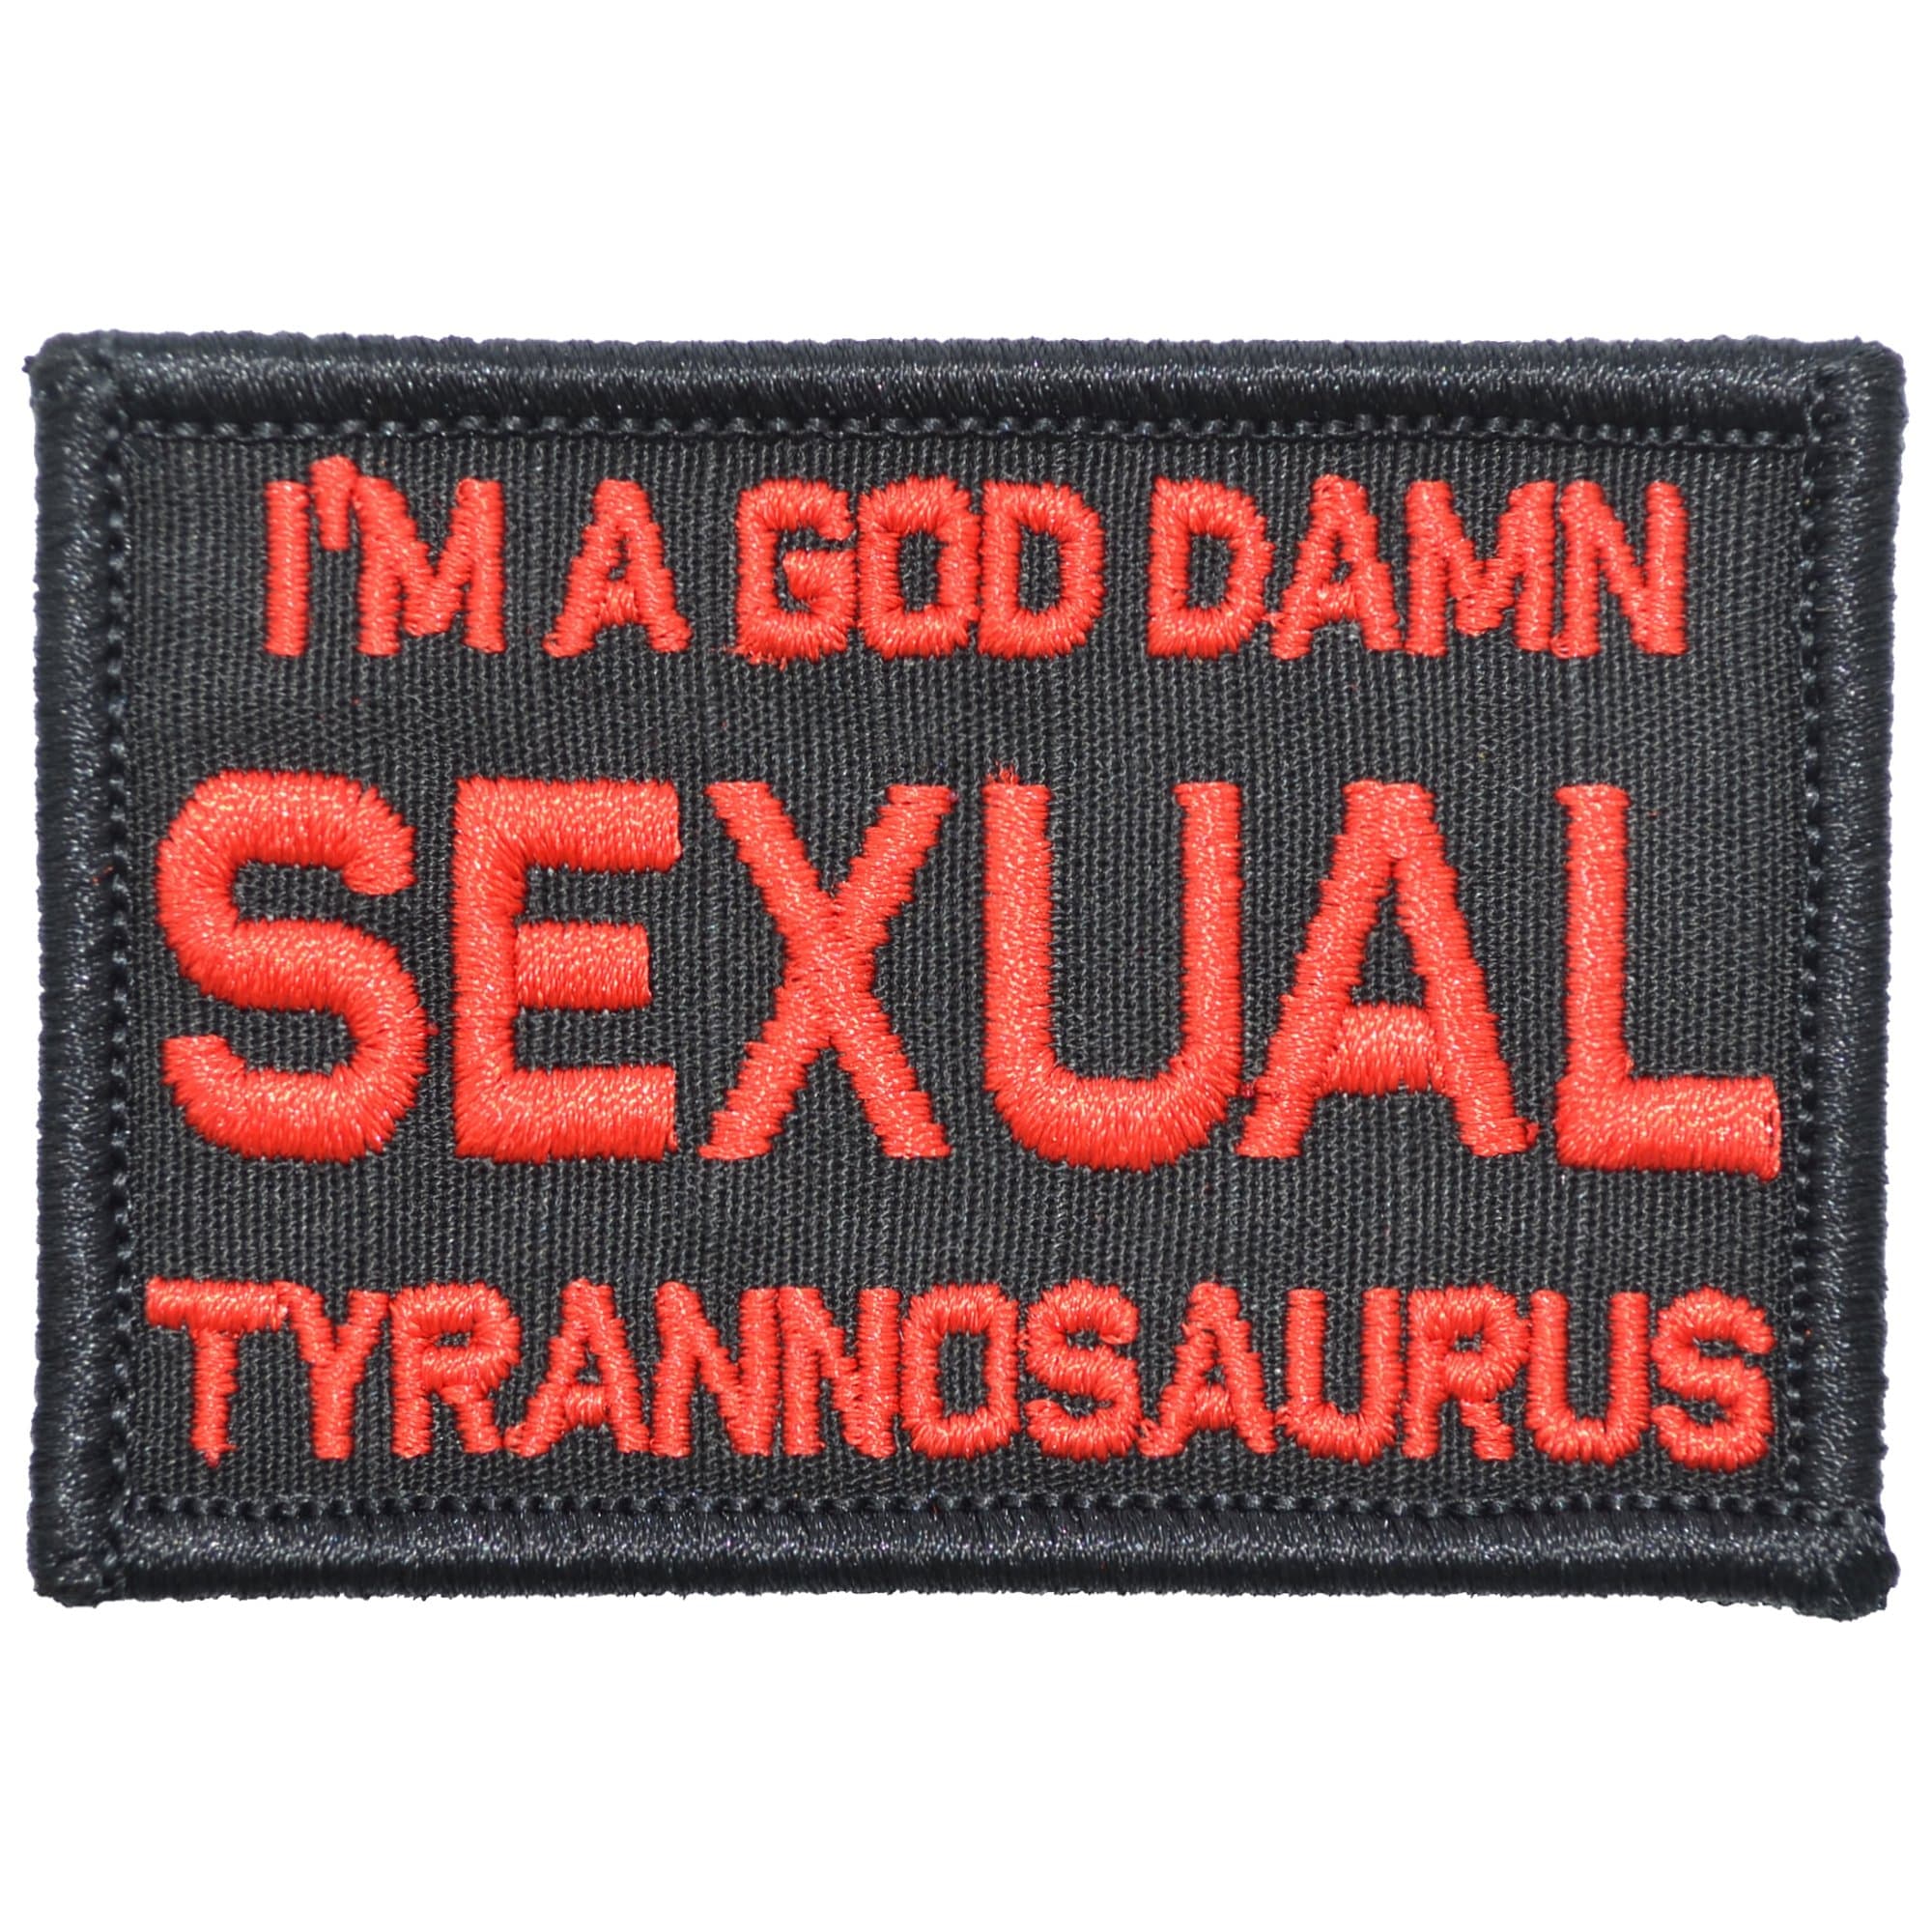 Tactical Gear Junkie Patches Black w/ Red I'm a God Damn Sexual Tyrannosaurus - 2x3 Patch